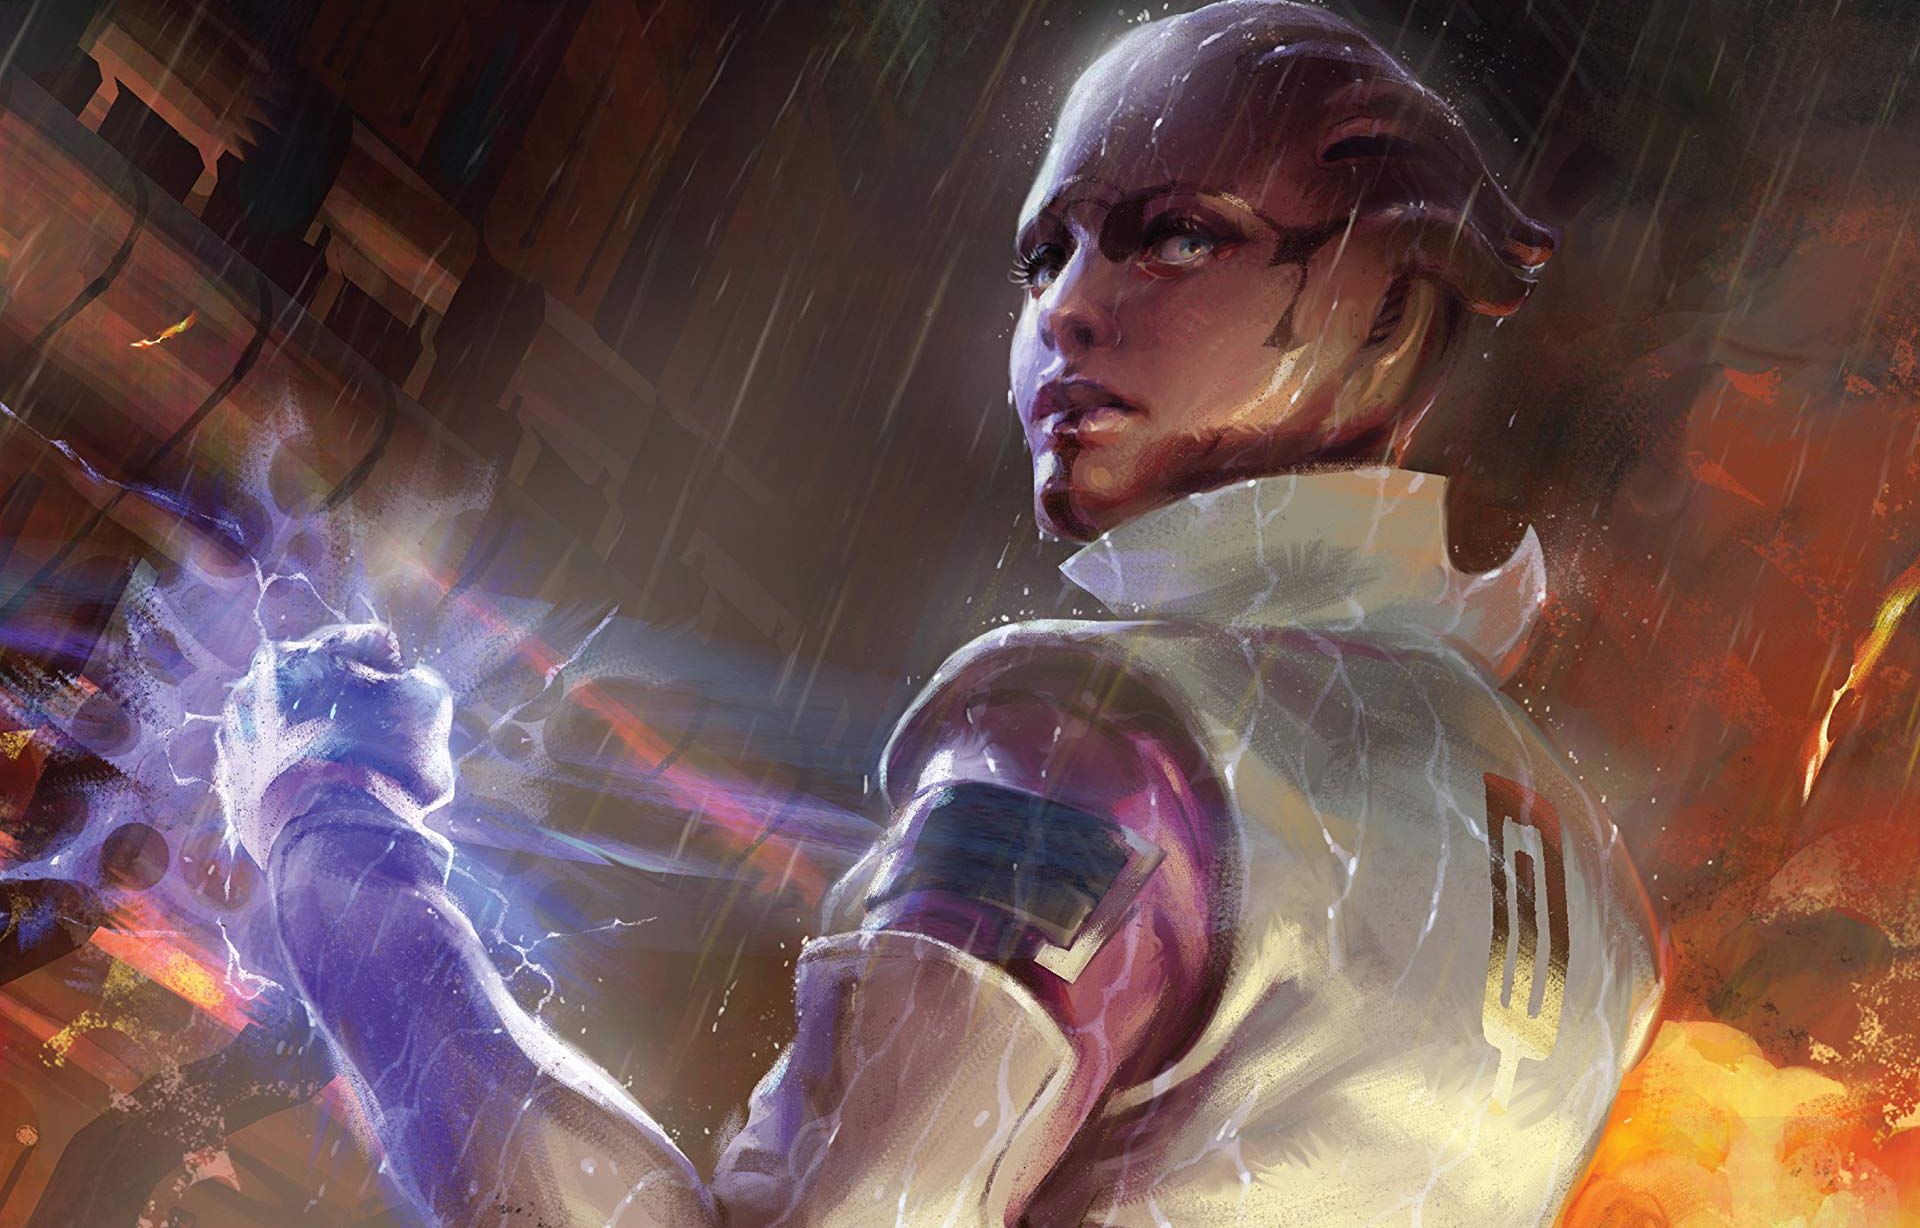  An expanded edition of the Mass Effect Trilogy art book is coming 